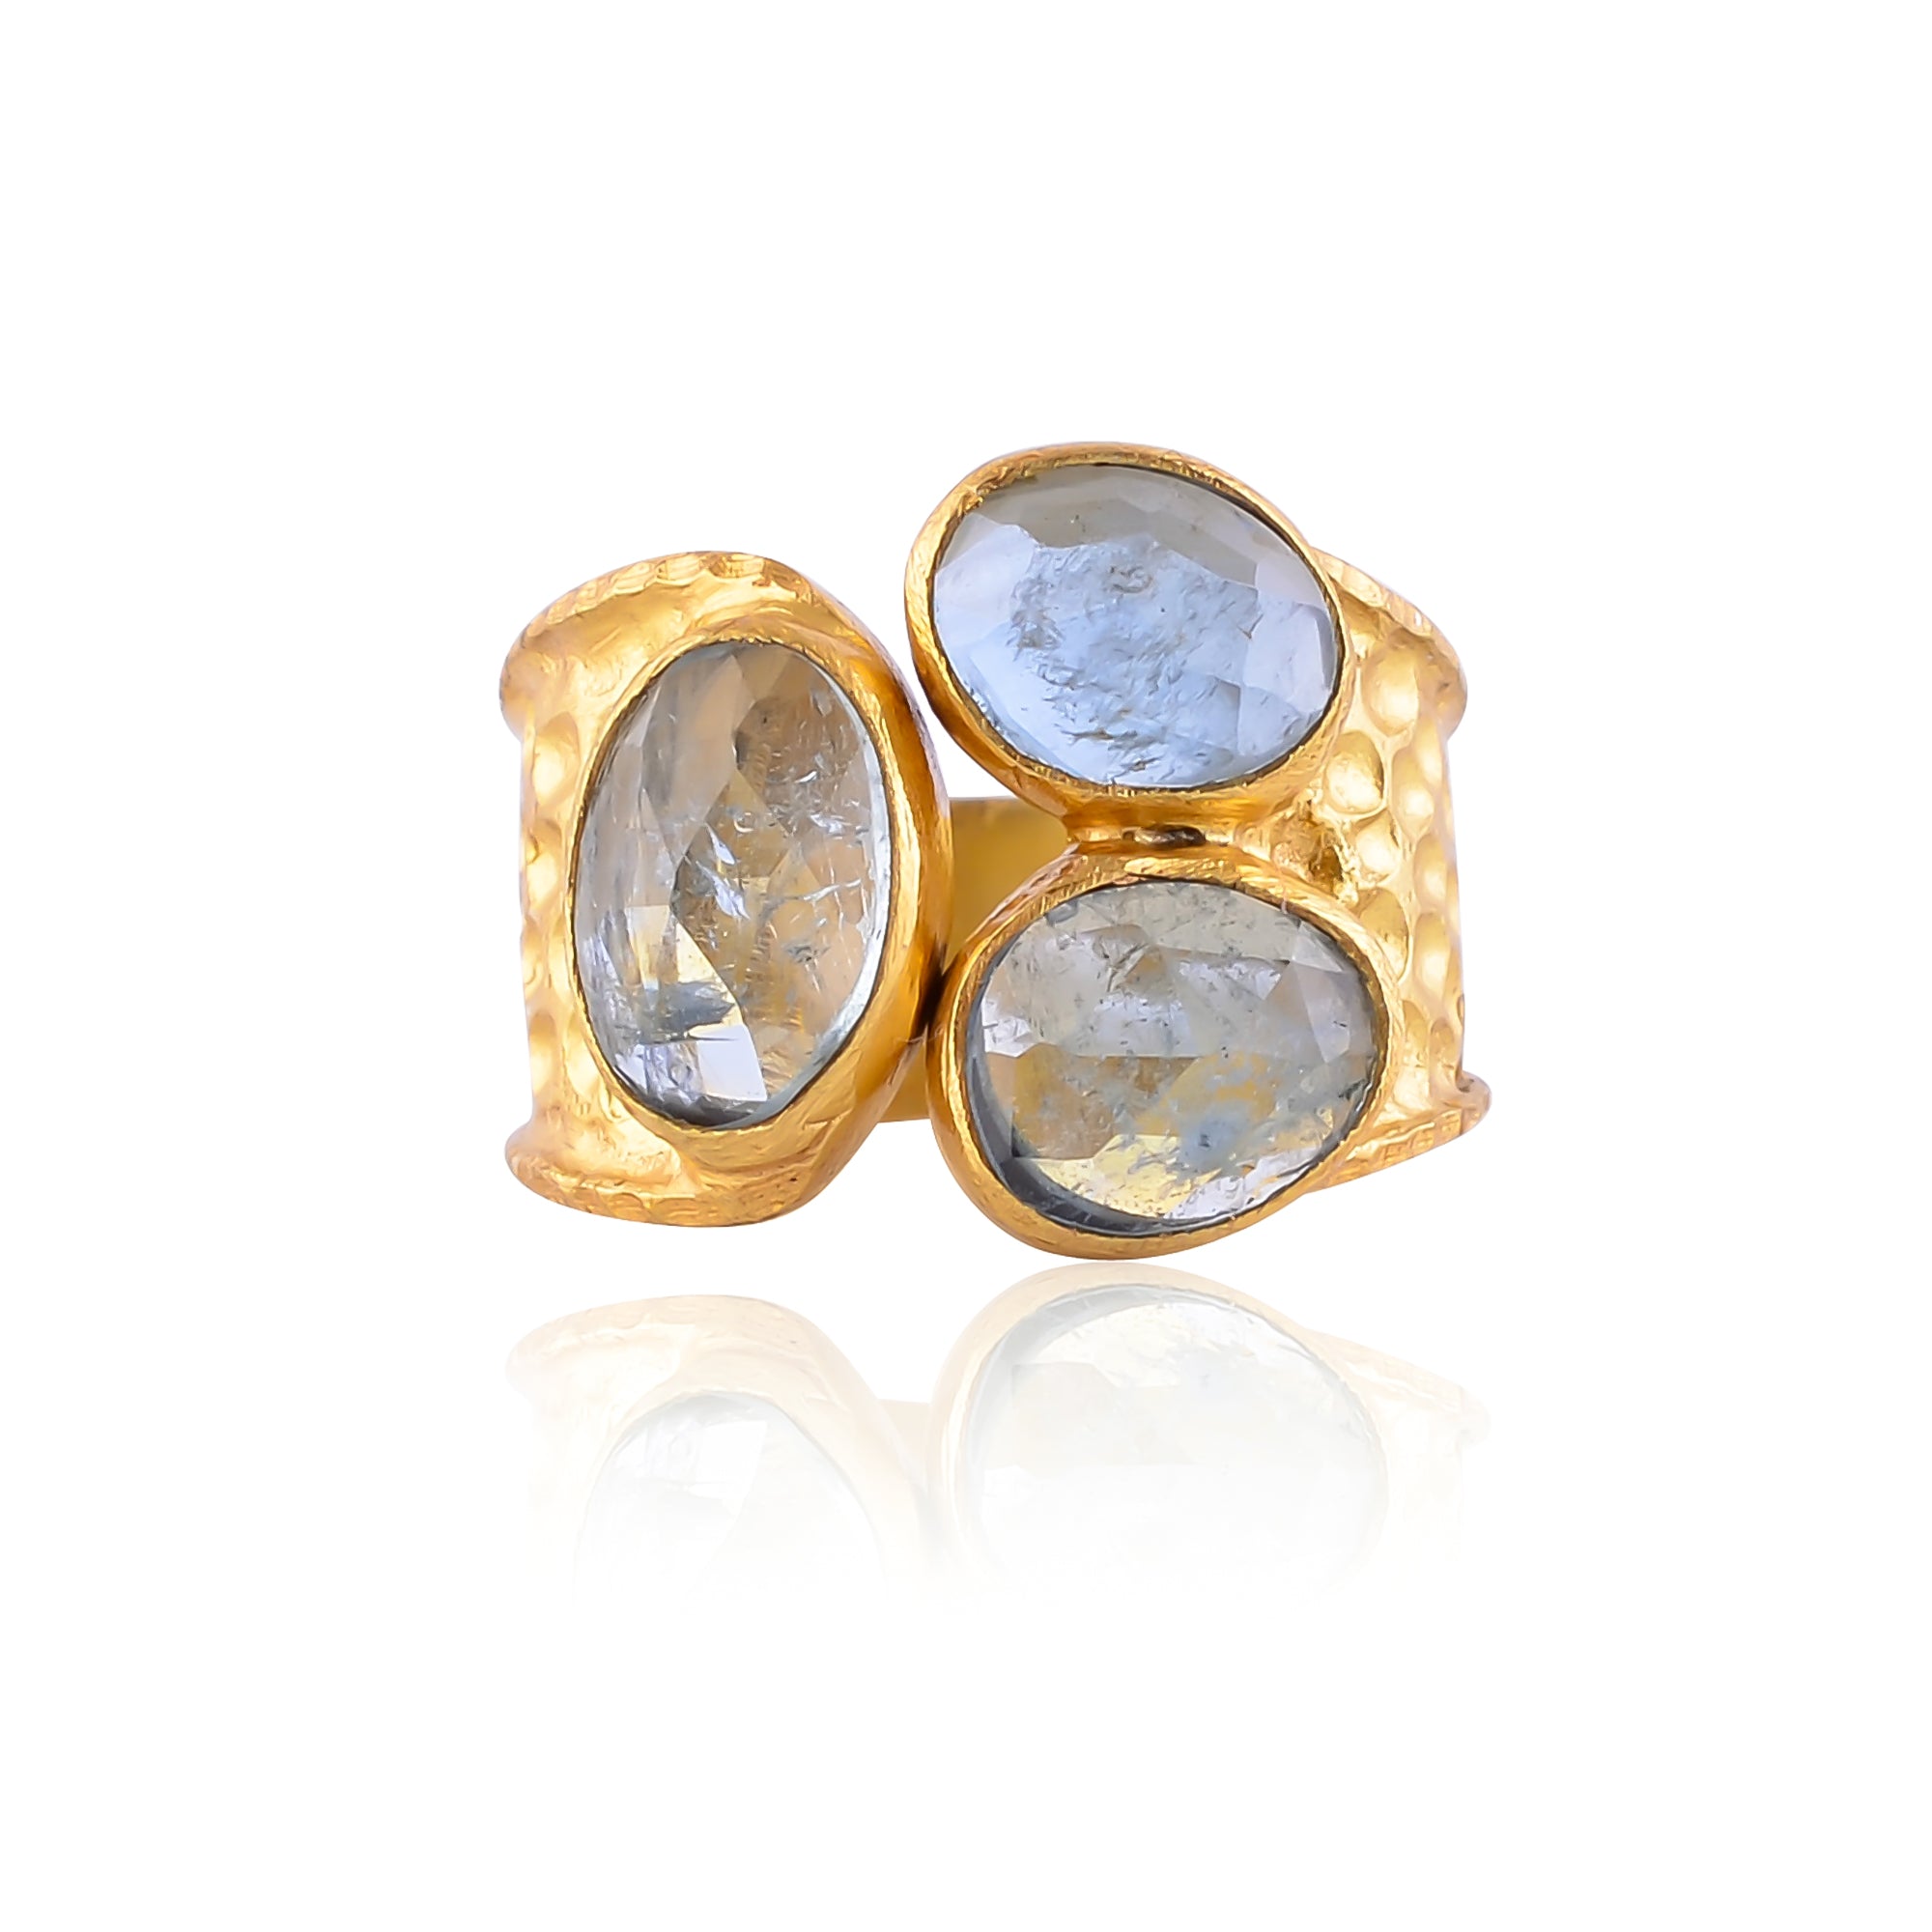 Buy Indian Handcrafted Silver Gold Plated Aquamarine Ring